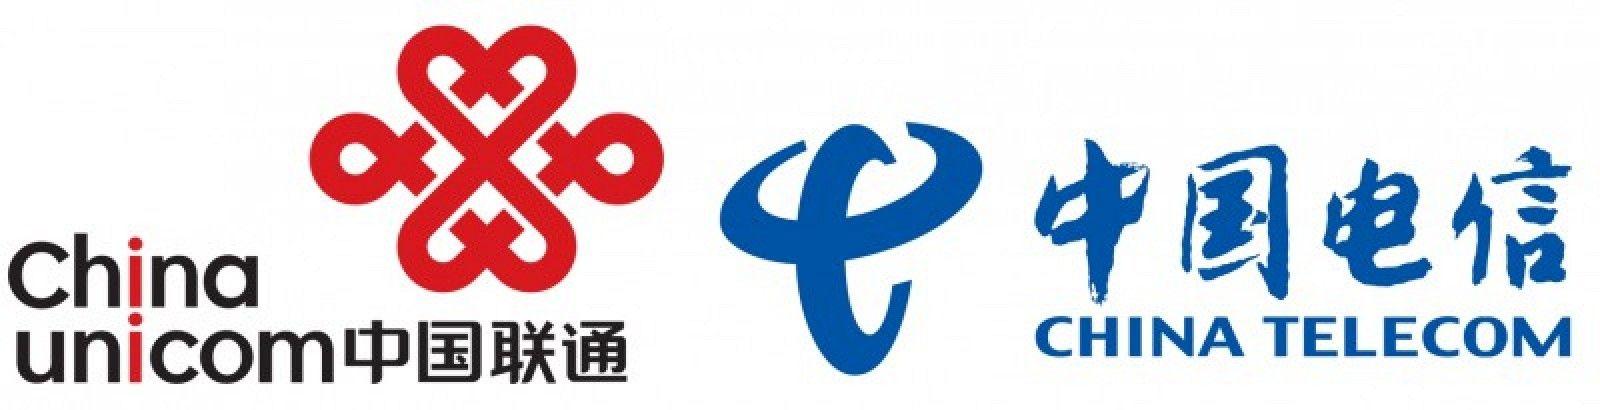 Chinese Telecommunications Company Logo - China Unicom and China Telecom to Start Pre-Orders for iPhone 5S and ...